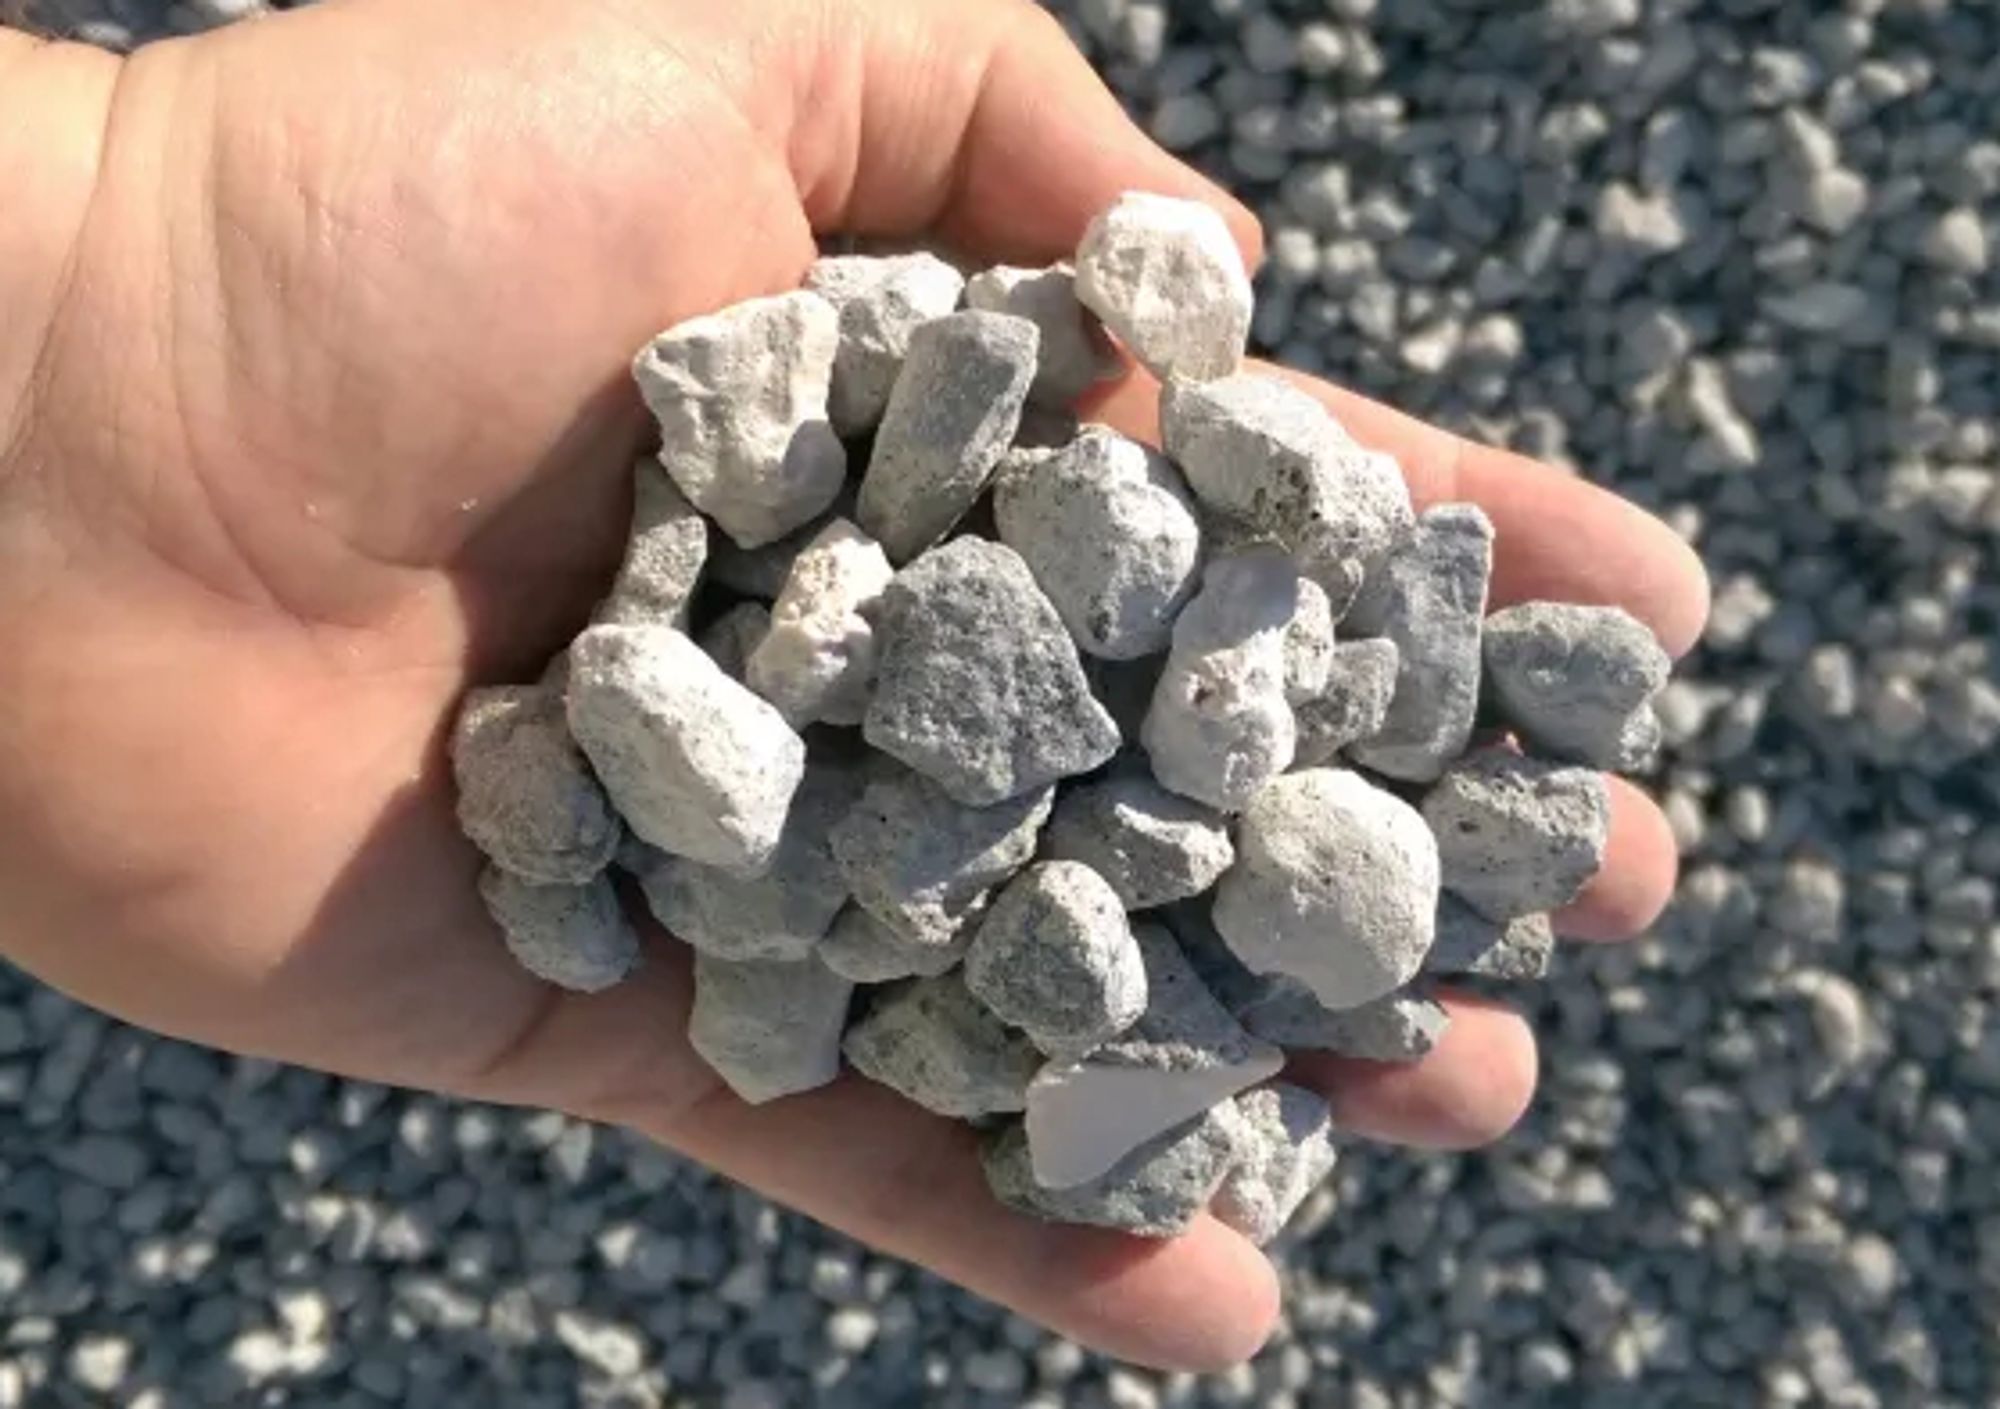 Holding Aggregate Rock